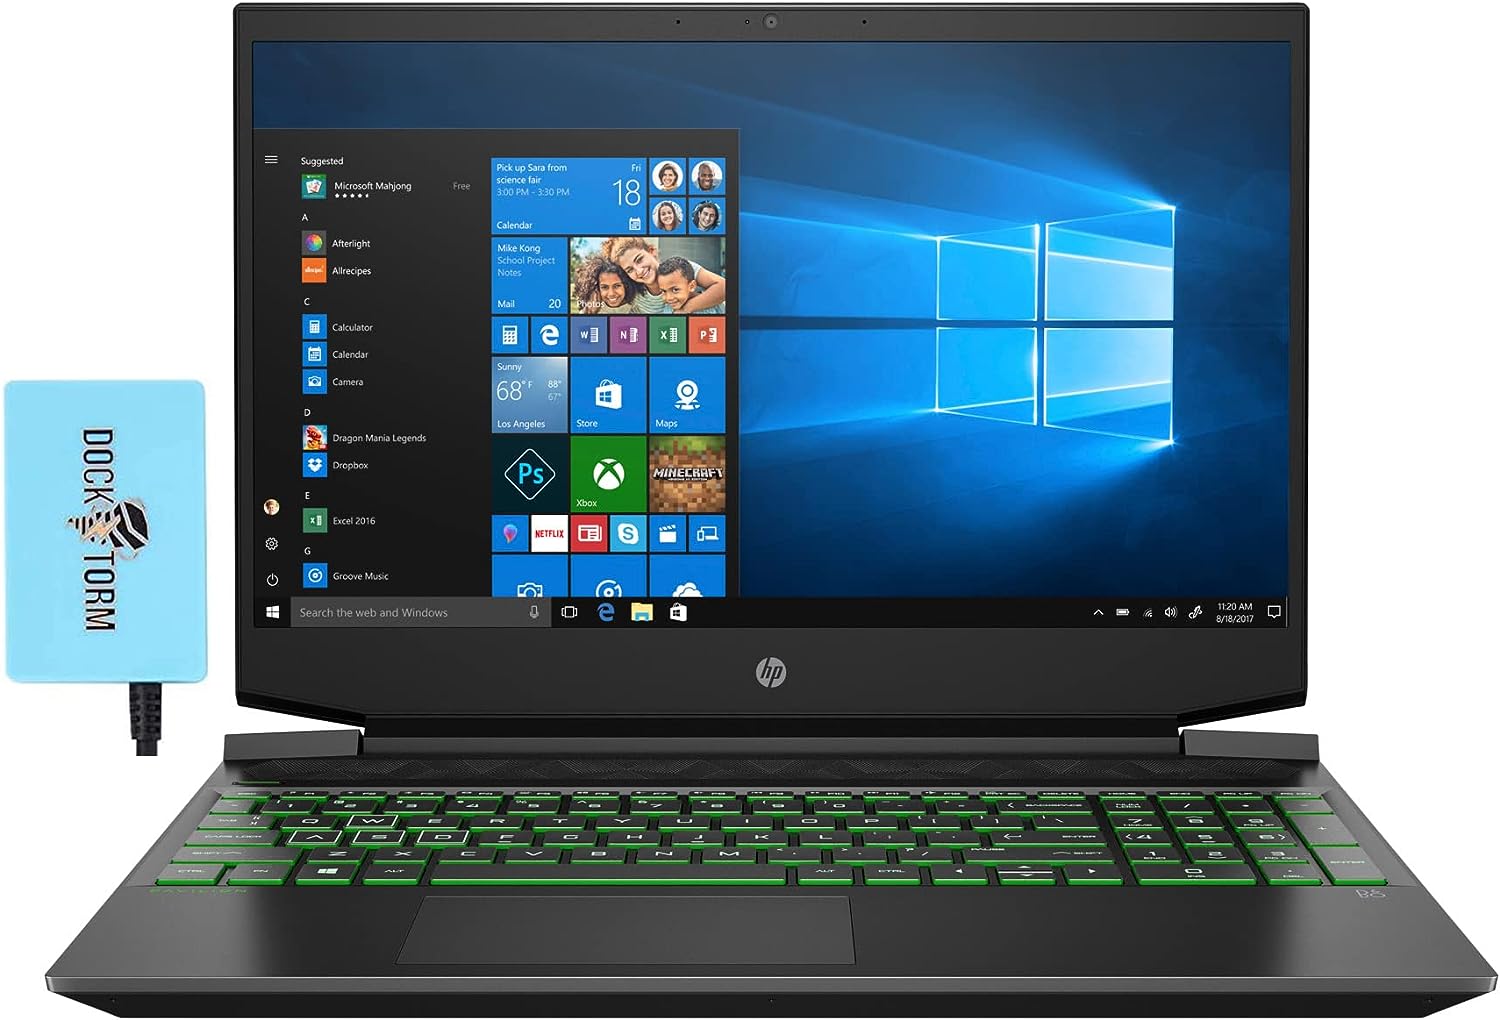 HP Pavilion 15z Gaming Laptop Review